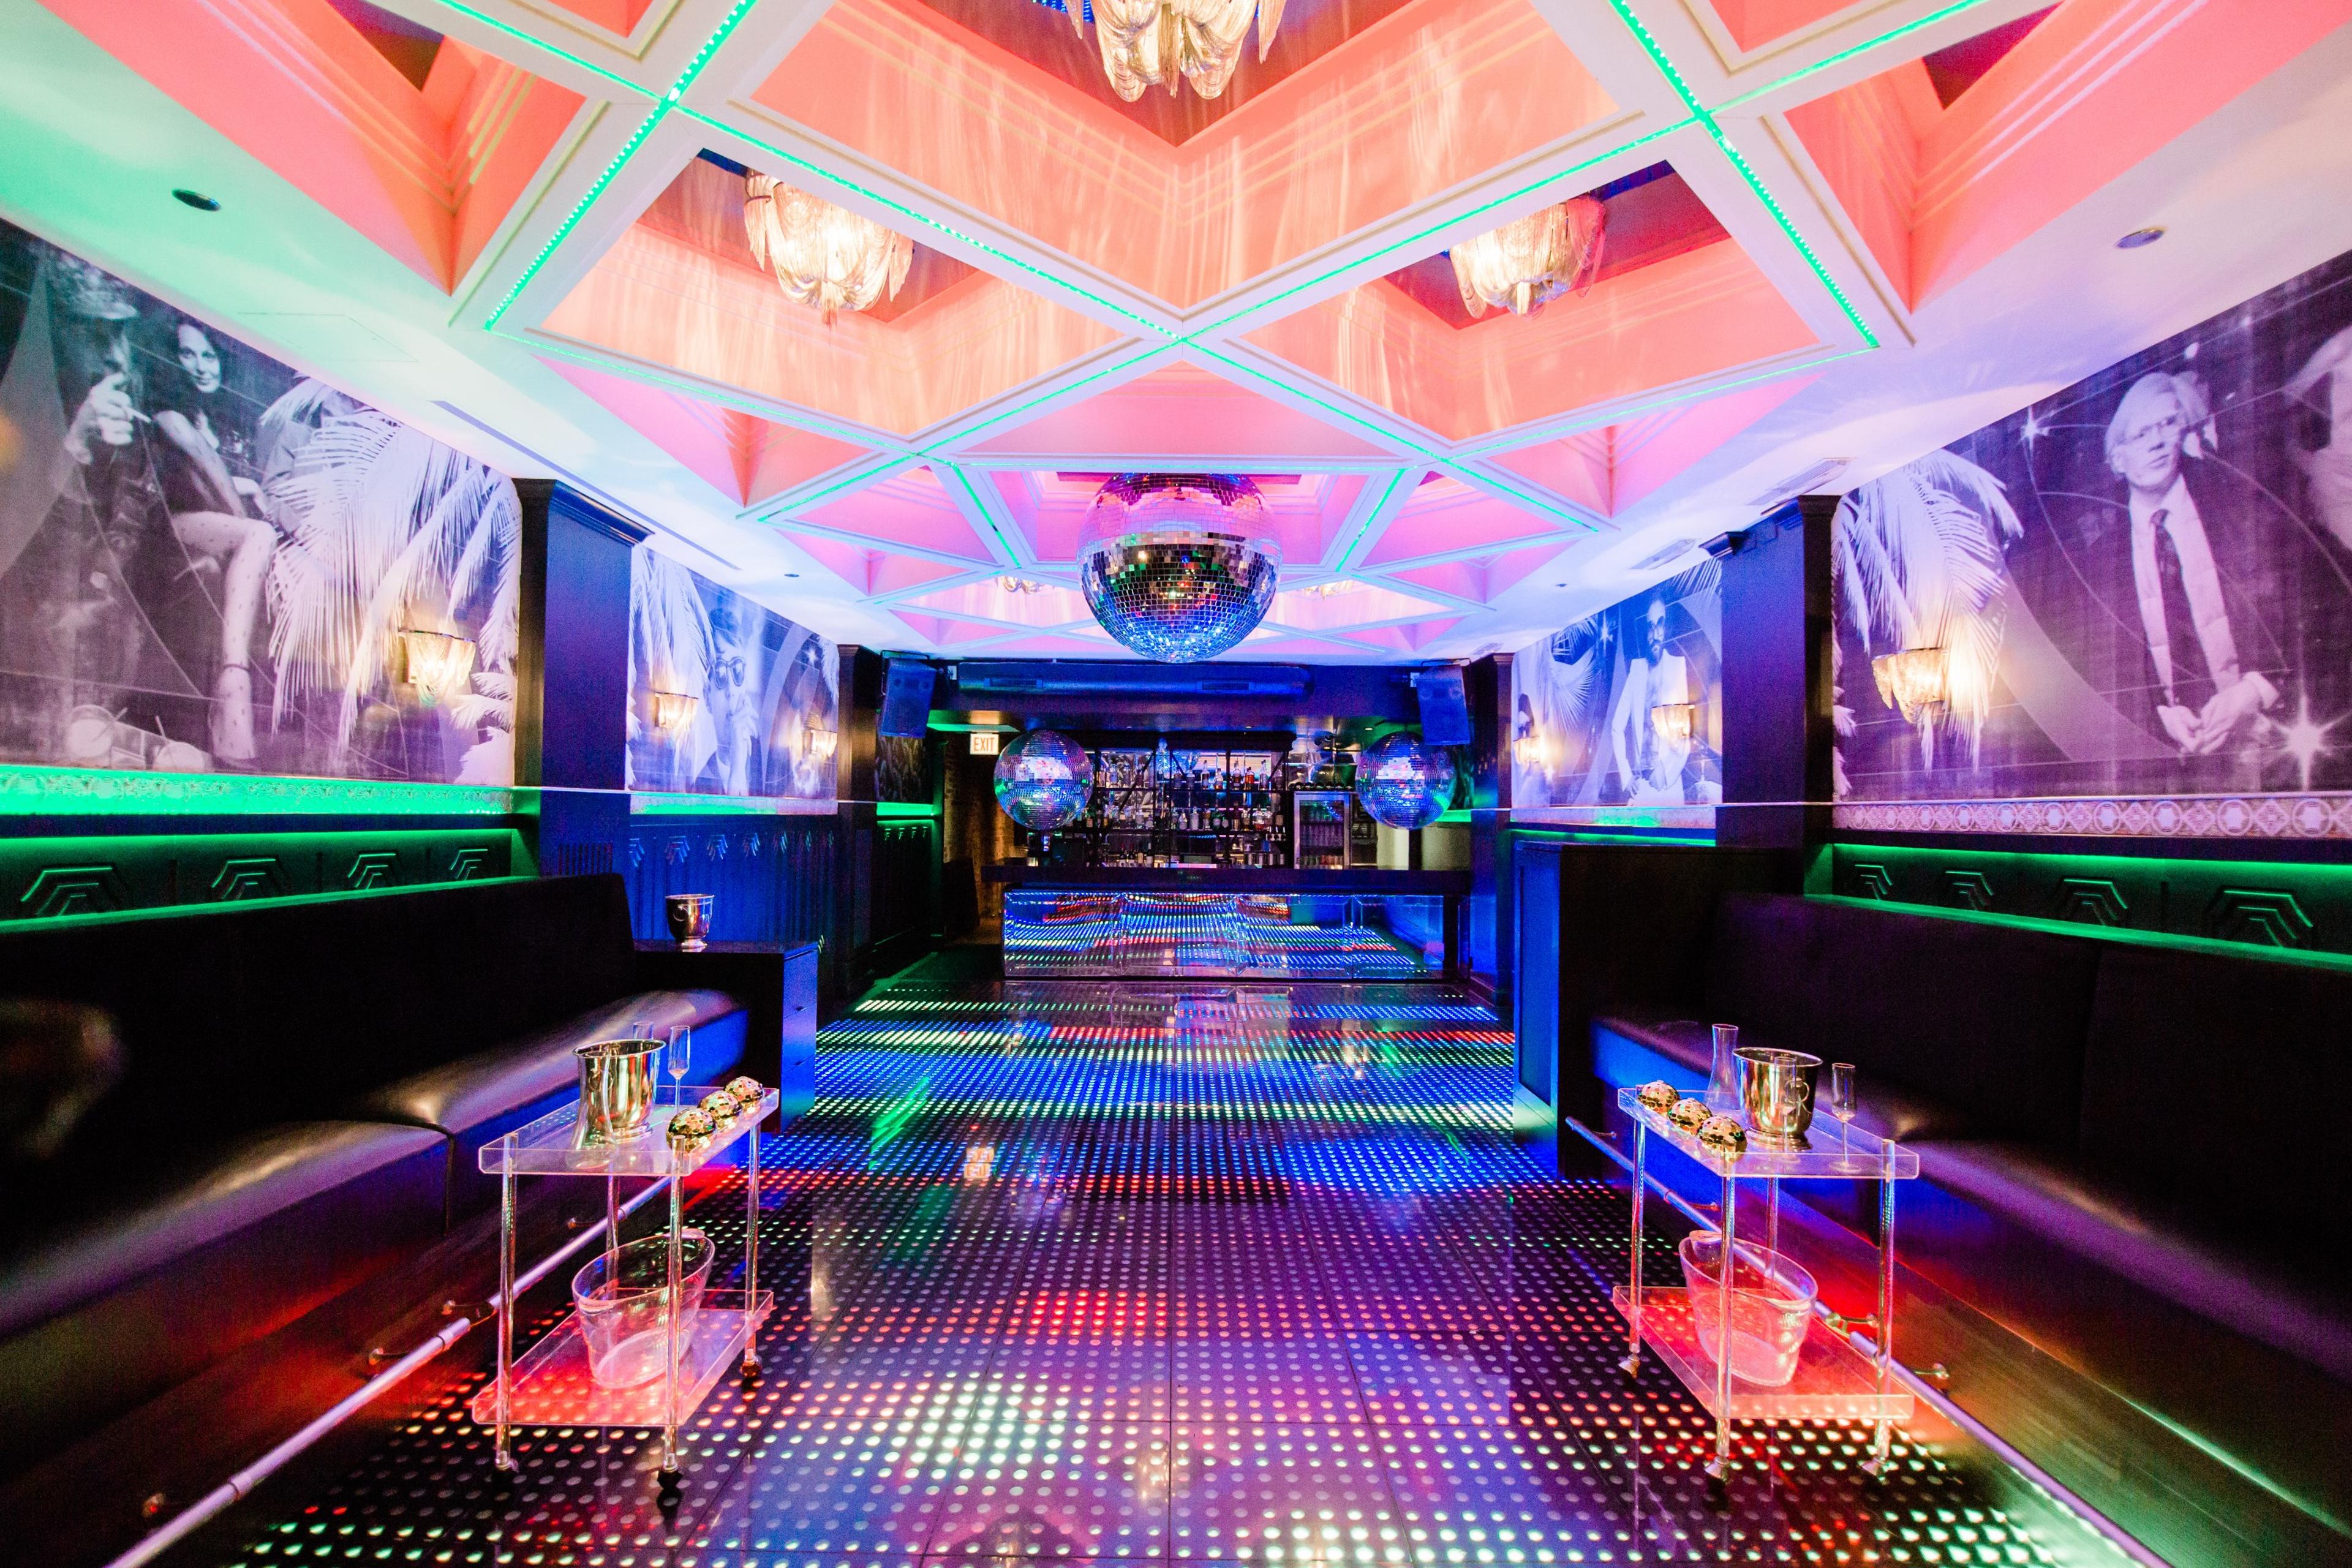 About - Celeste - Night club in Chicago, IL